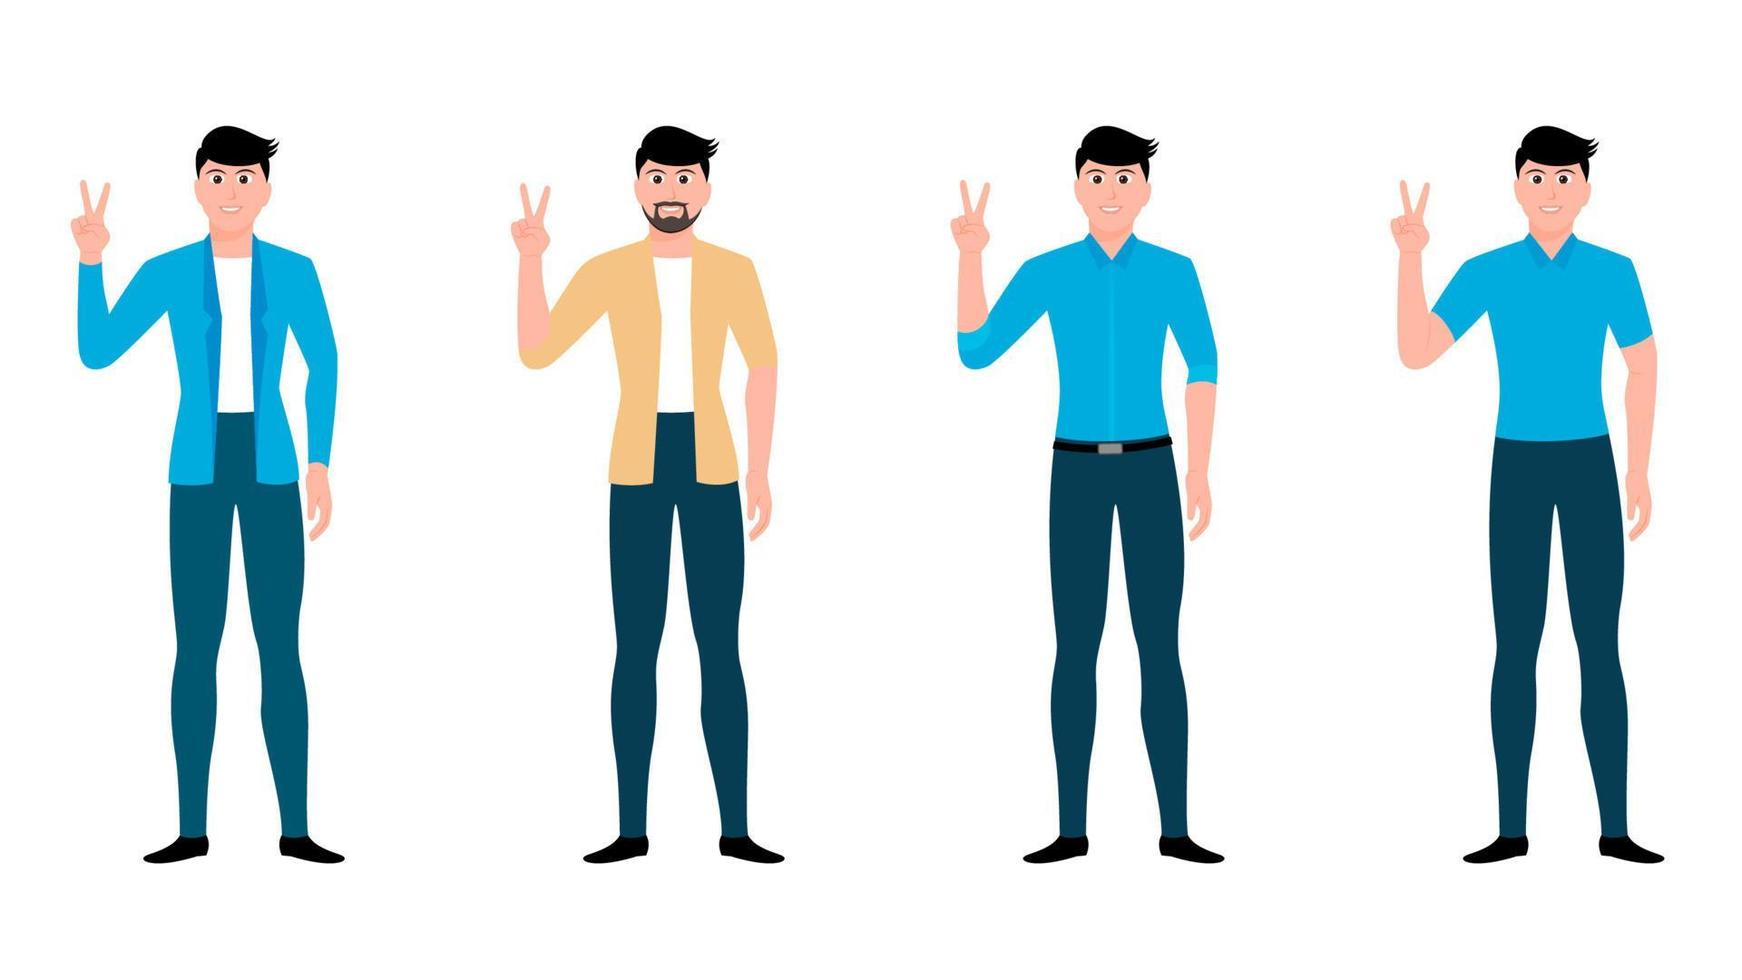 happy men shows gesture of victory by hand and other hand on waist. flat hand gesture vector